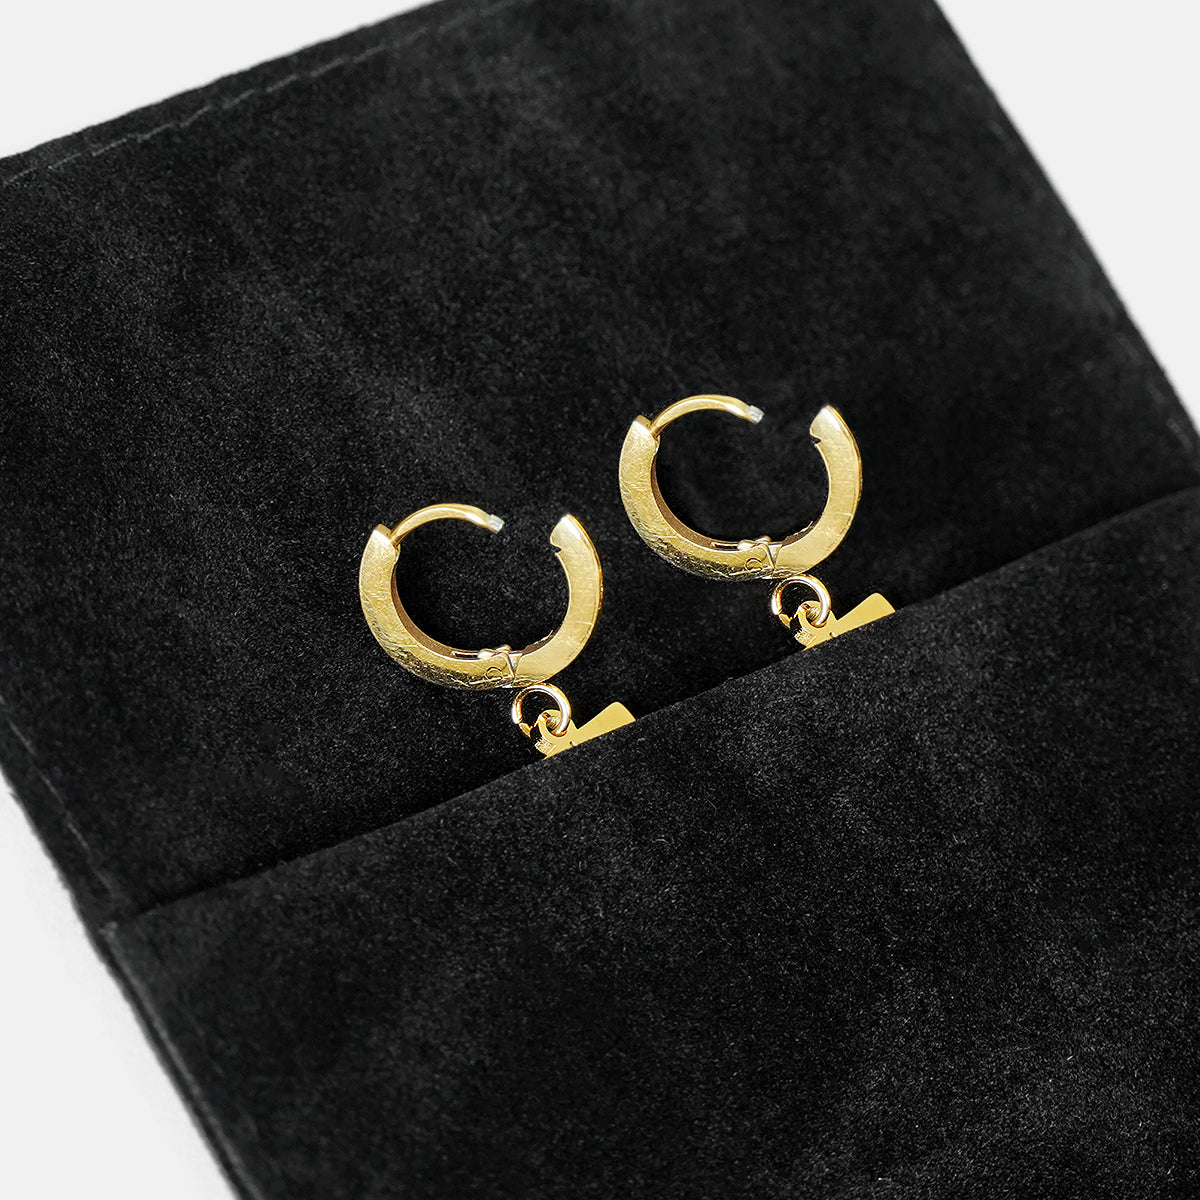 73 Number Earring - Gold Plated Stainless Steel